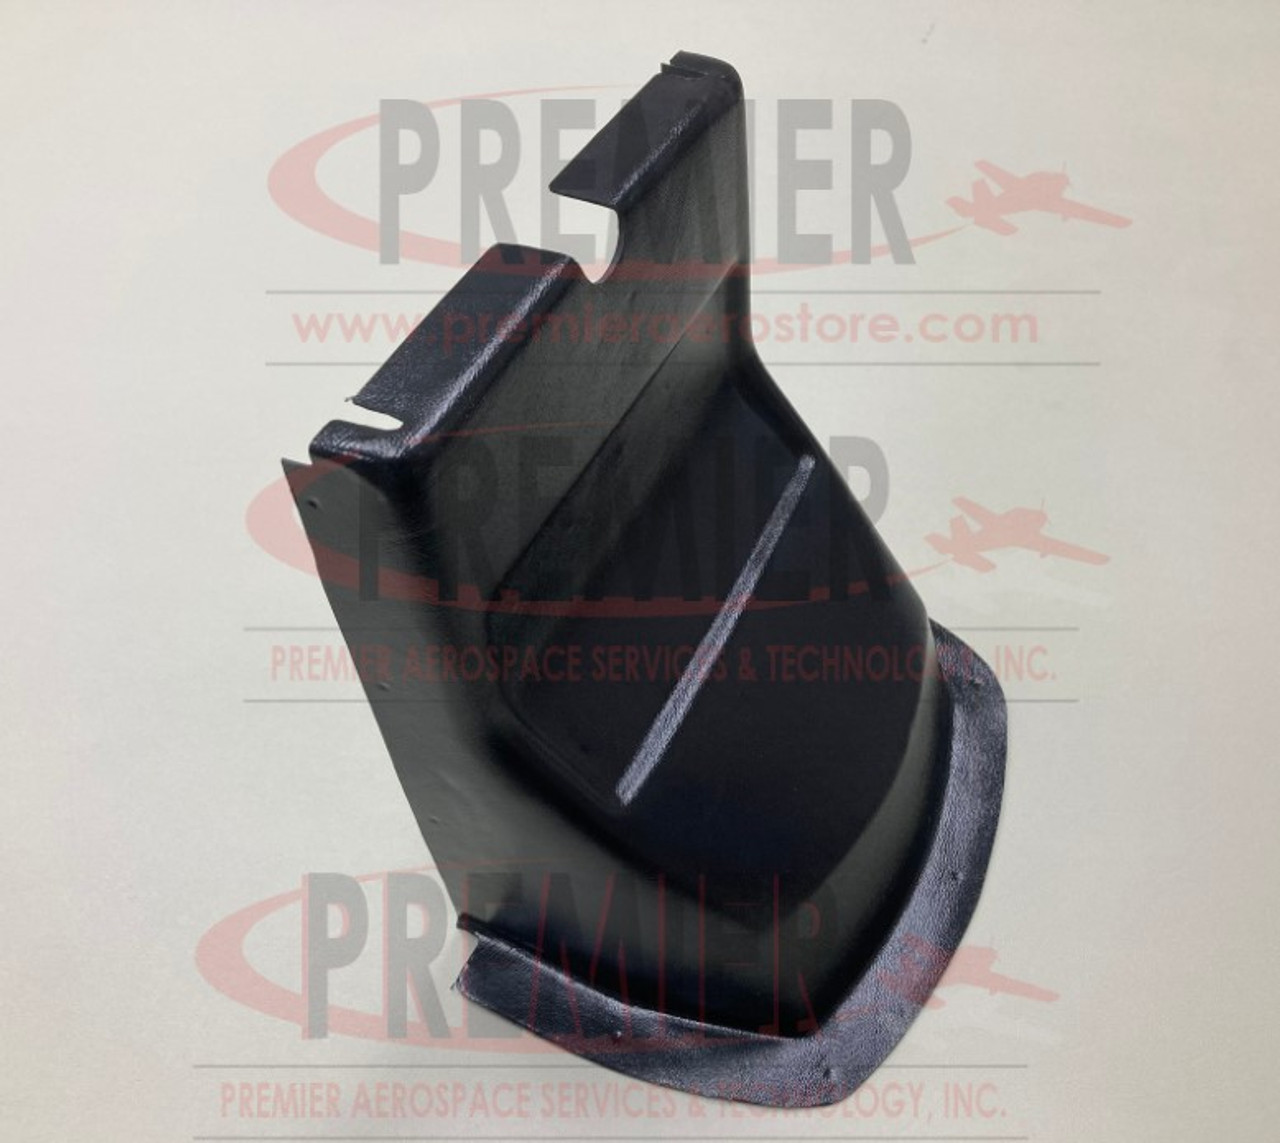 P32788-003, PIPER PA23-250, COVER ASSY, NOSE GEAR, CABIN AIR, 32788-003, 32788-03